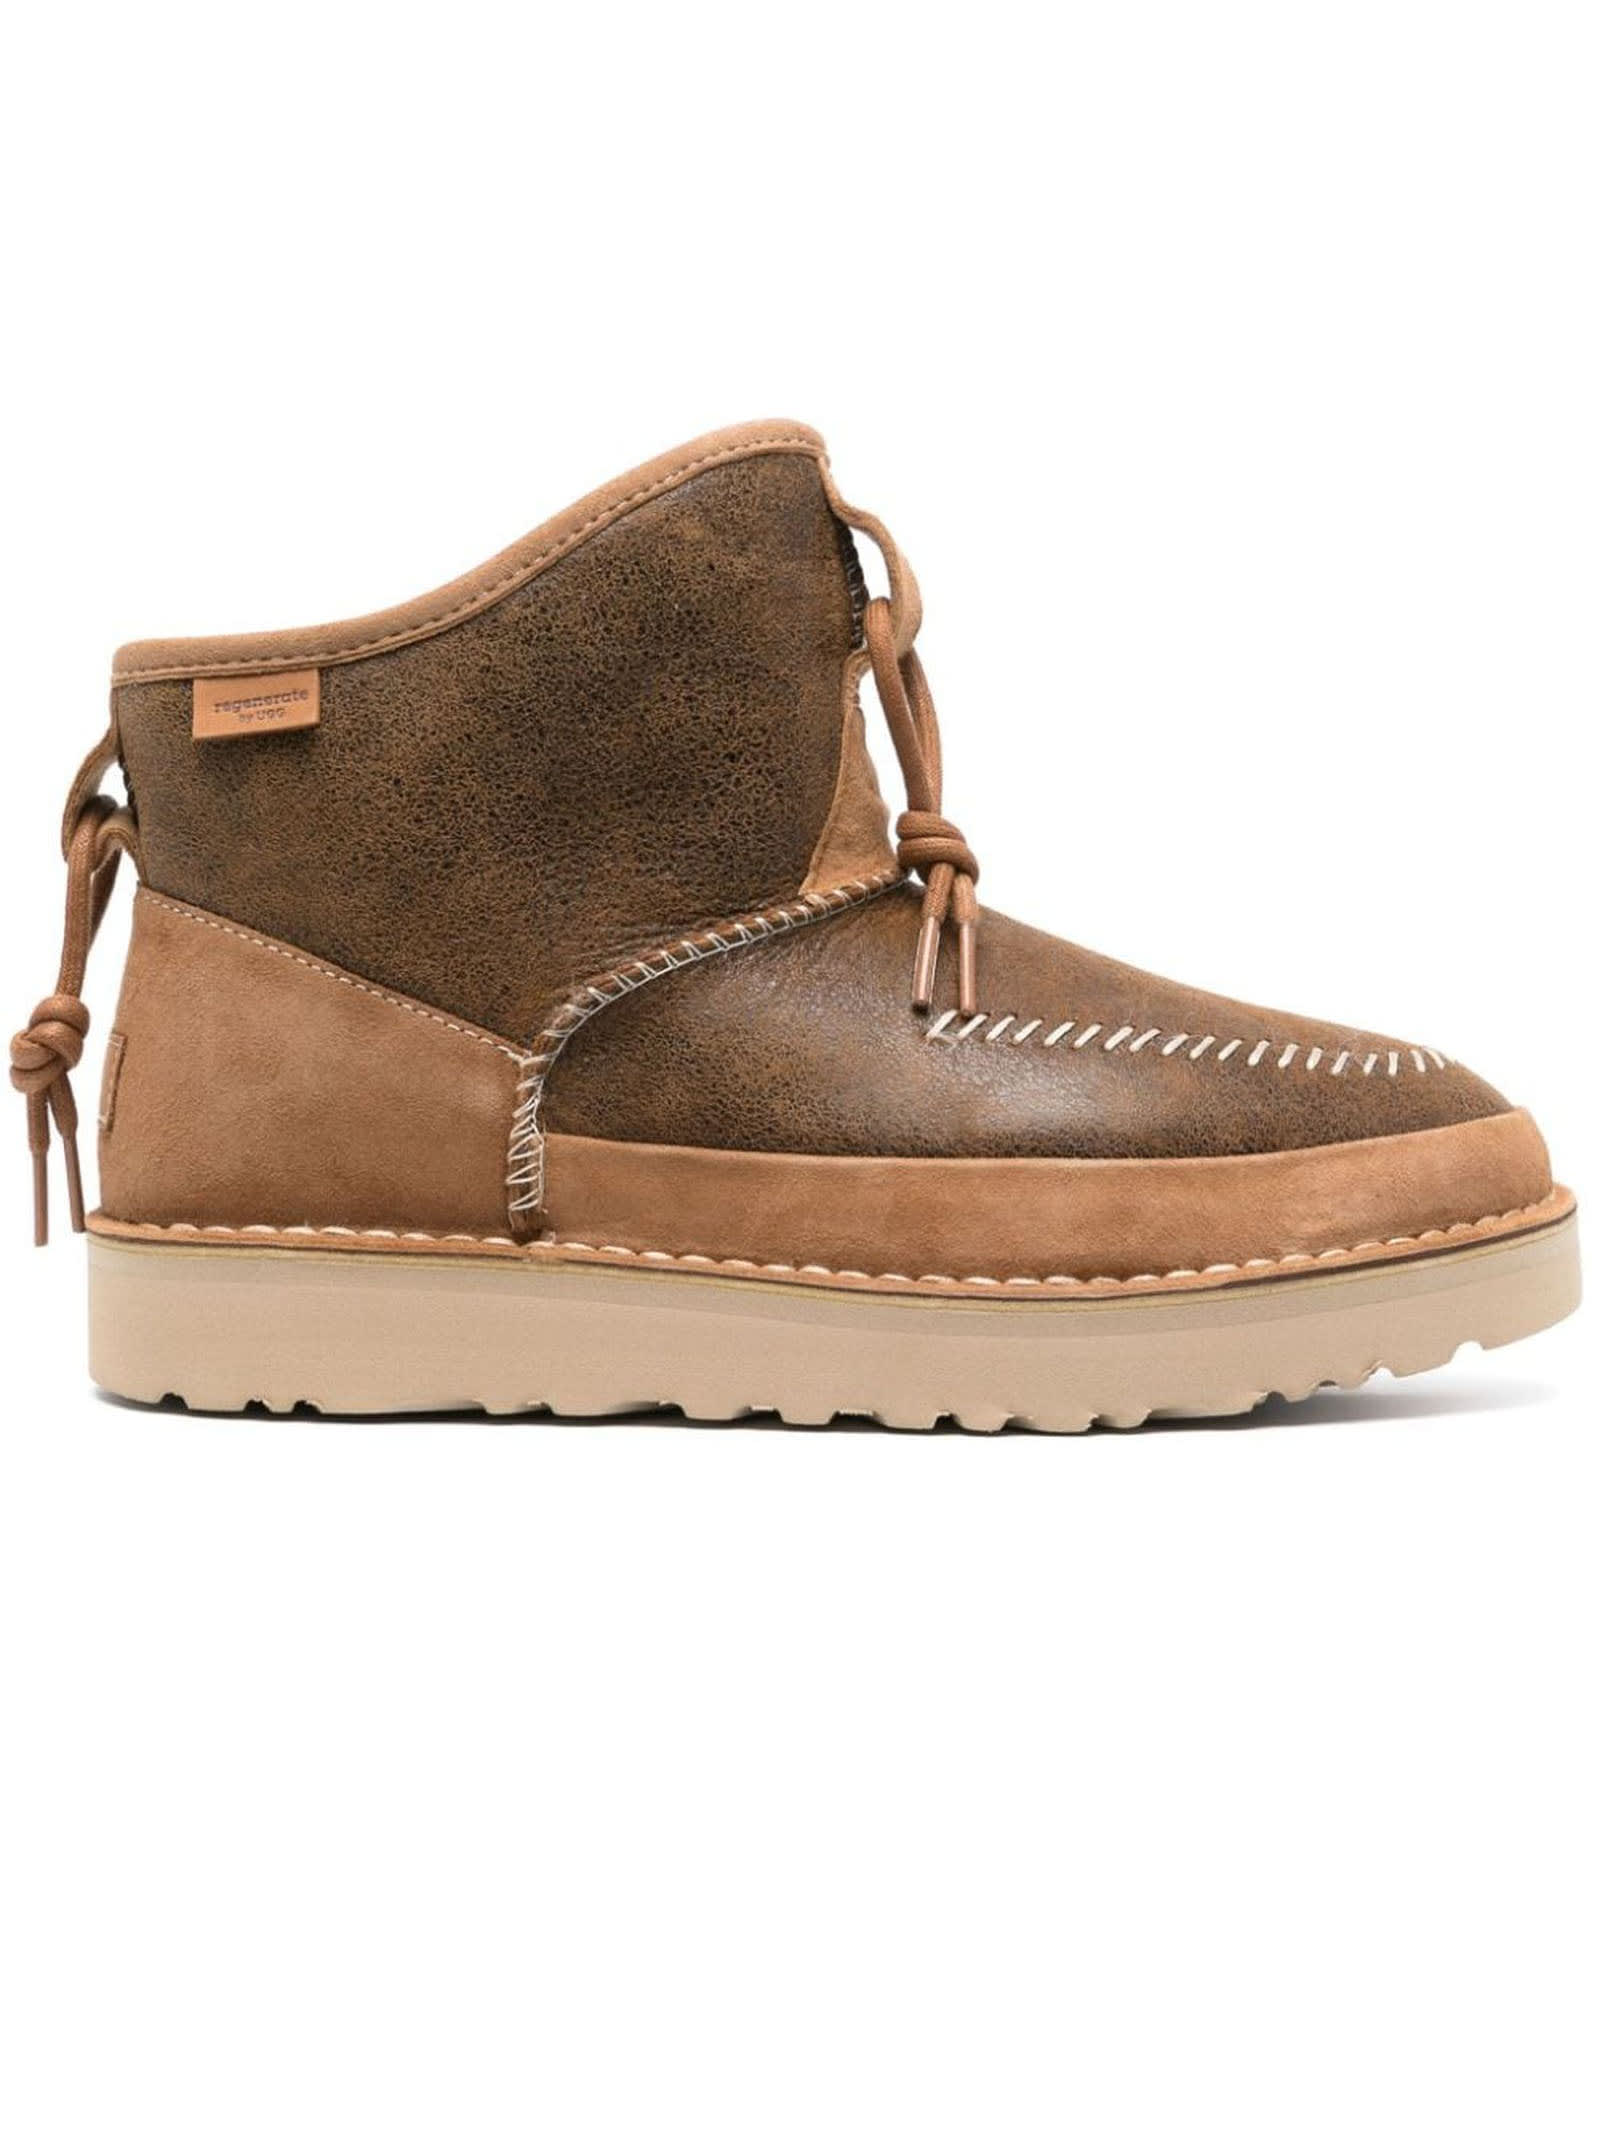 UGG BROWN CALF LEATHER ANKLE BOOTS